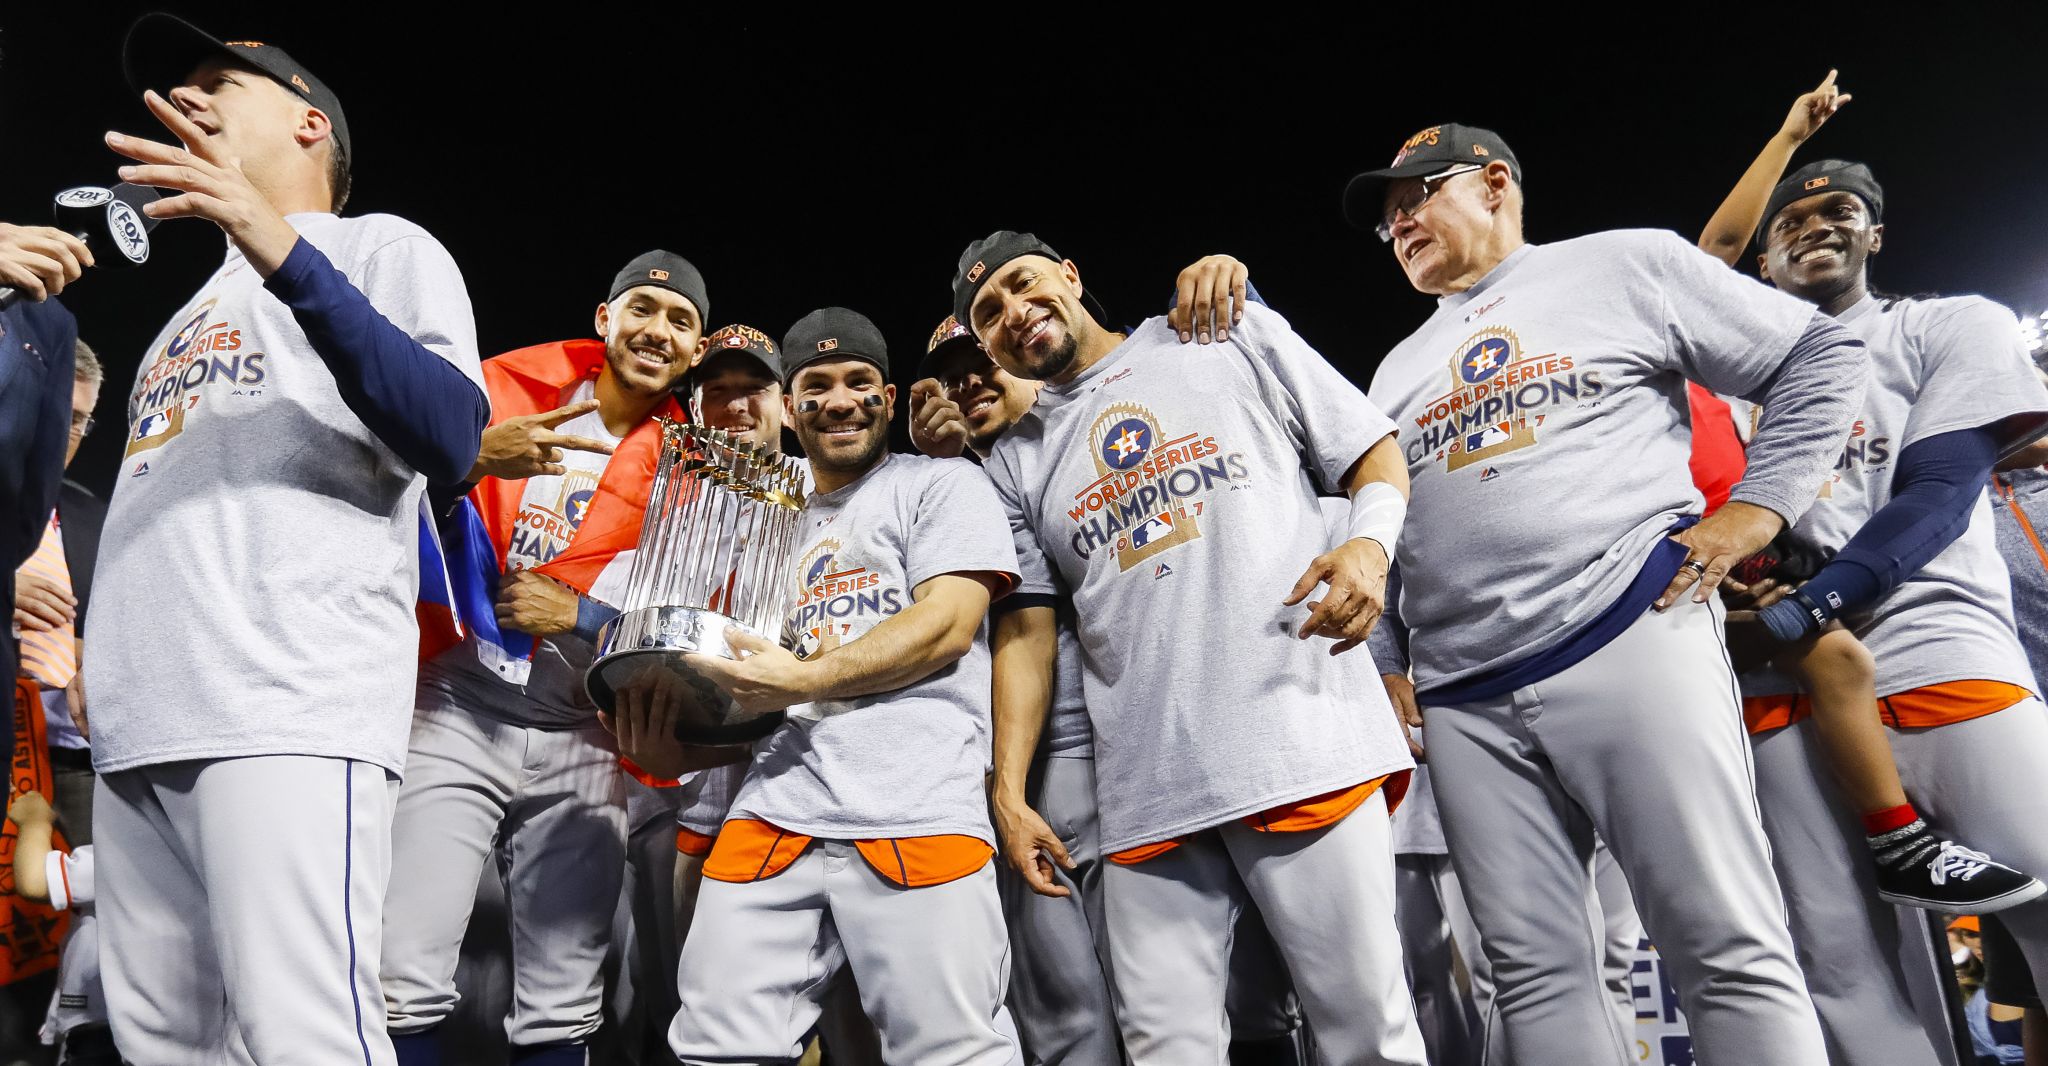 Astros Win First World Series, Top Dodgers 5-1 in Game 7 - Bloomberg